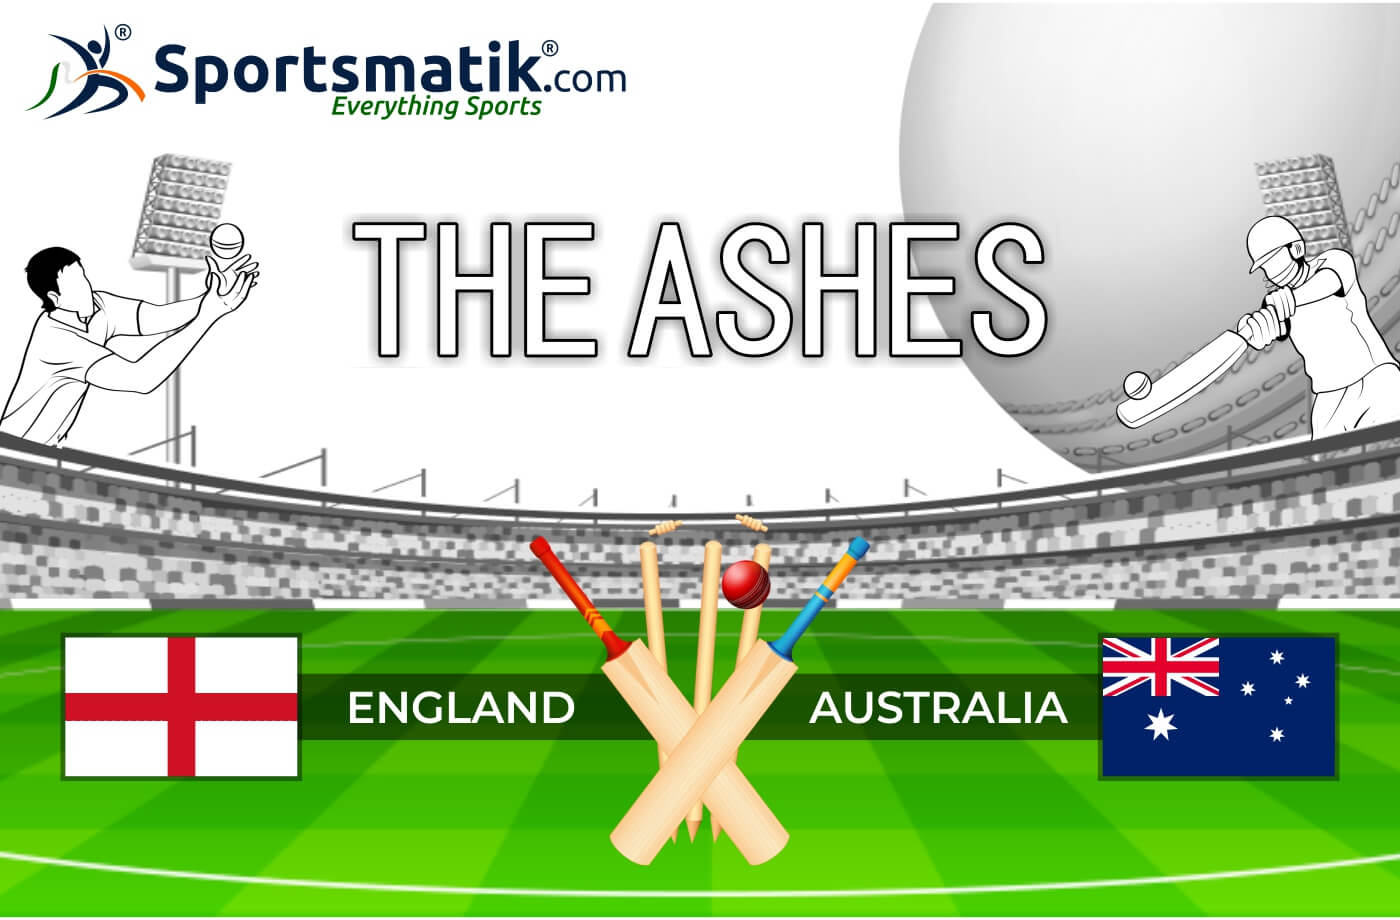 The 2019 Ashes Series